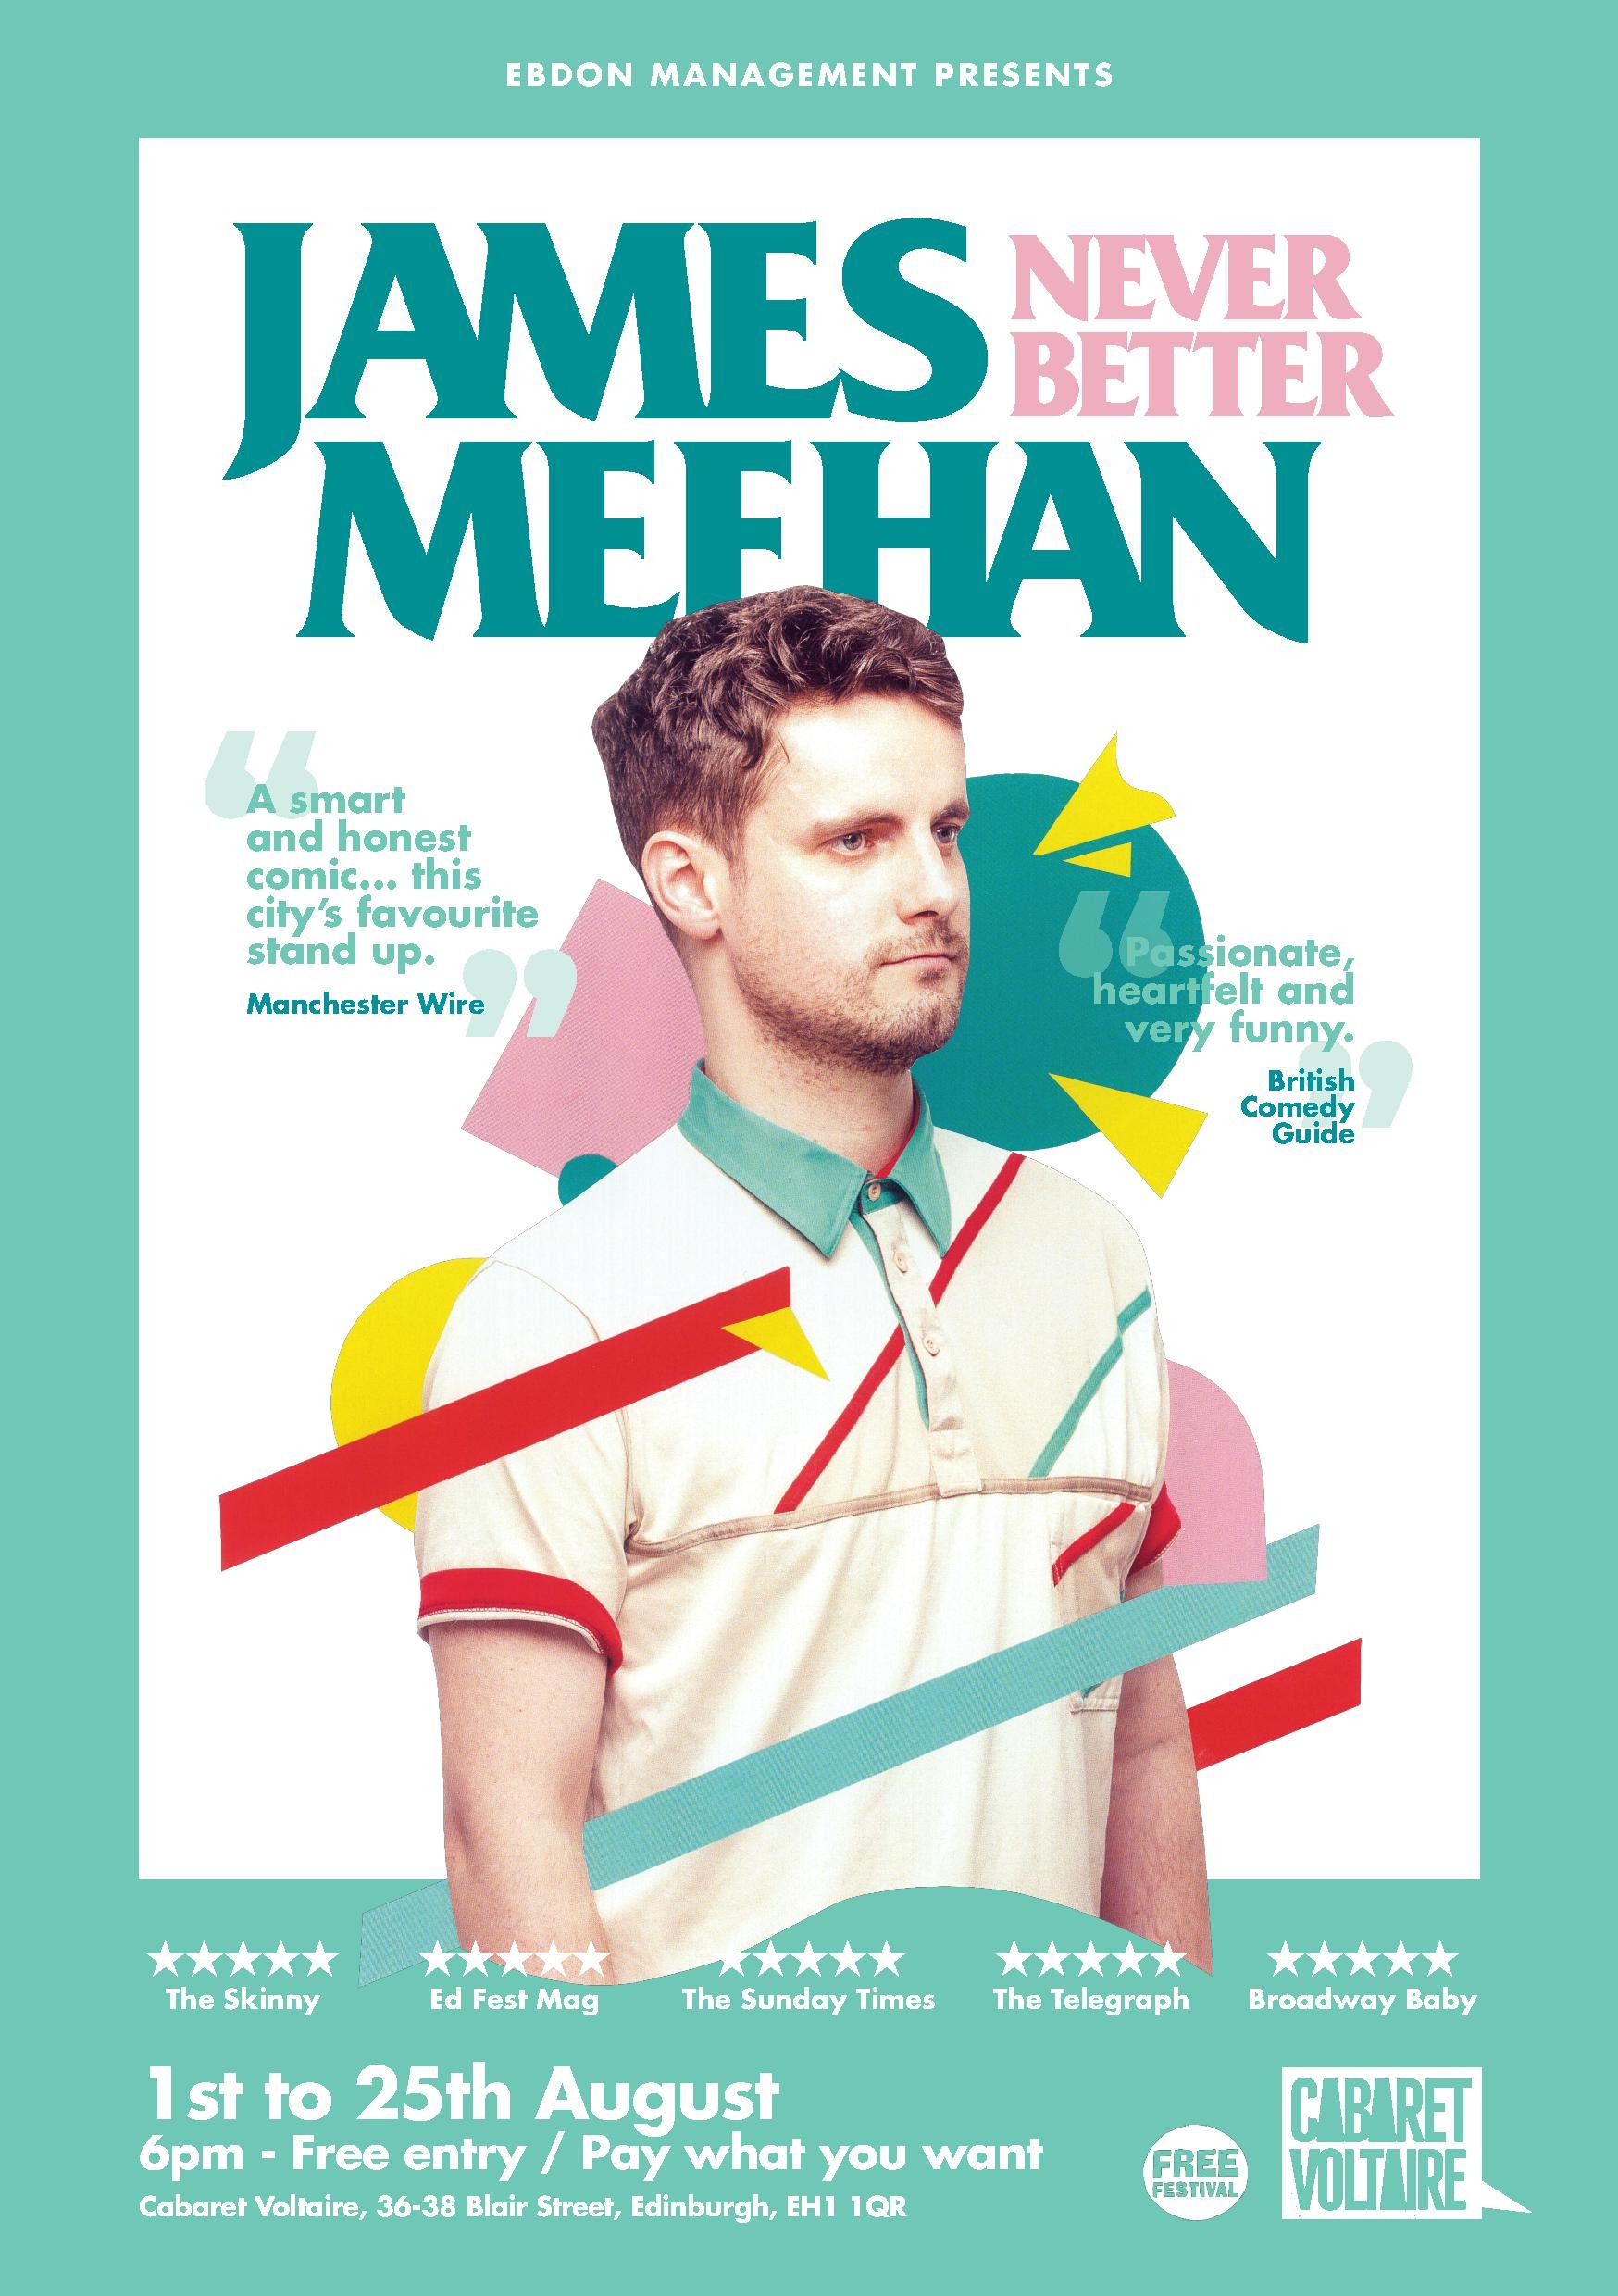 The poster for James Meehan - Never Better